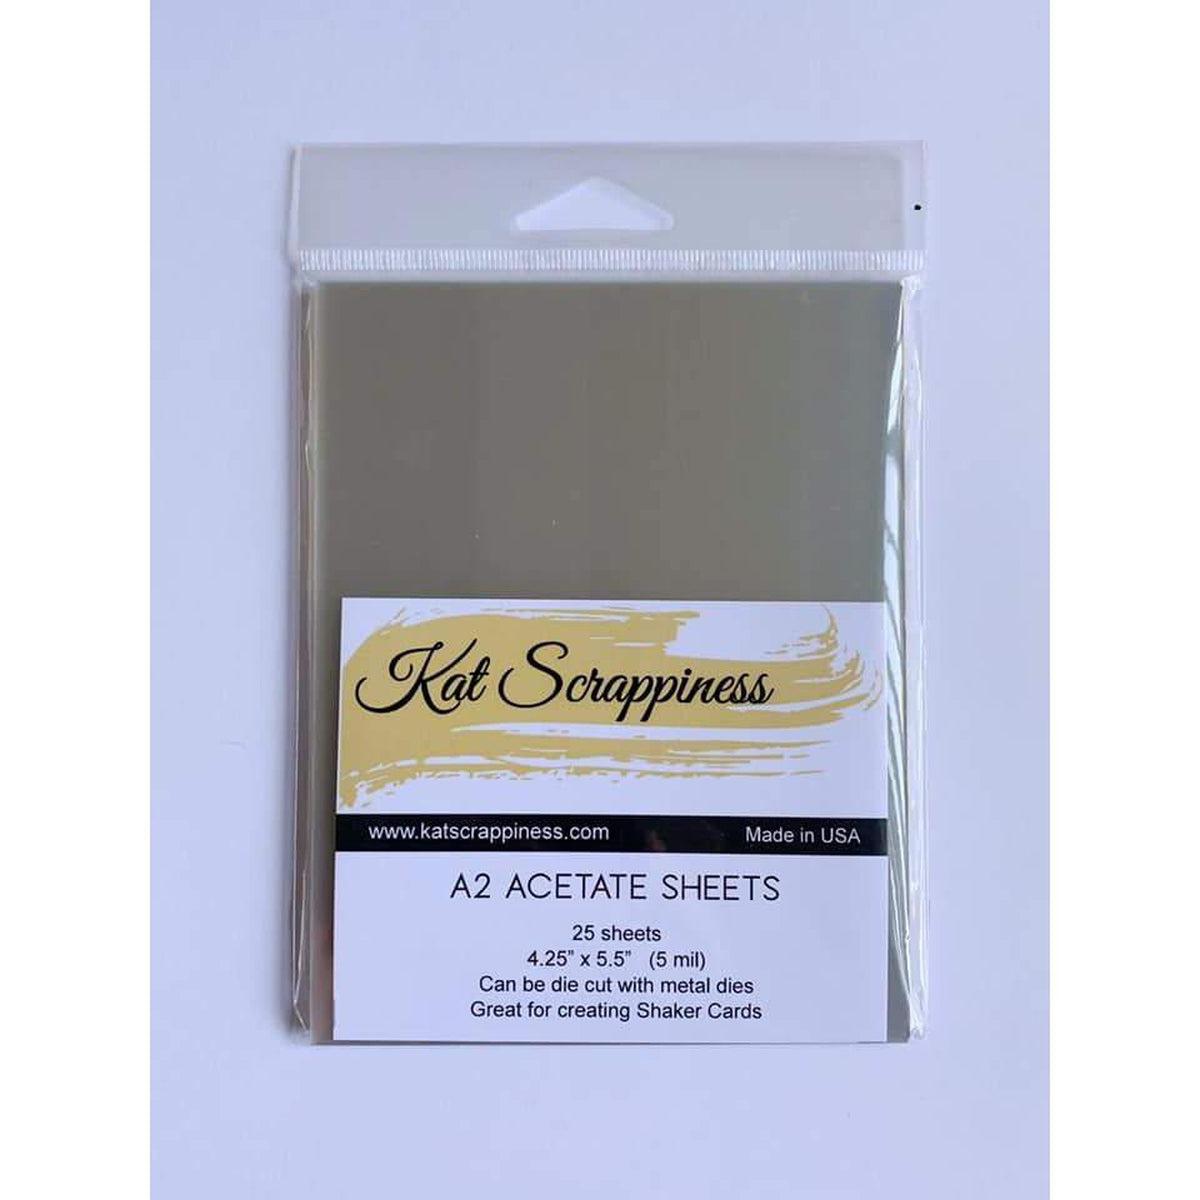 A2 Acetate sheets from Kat Scrappiness.com